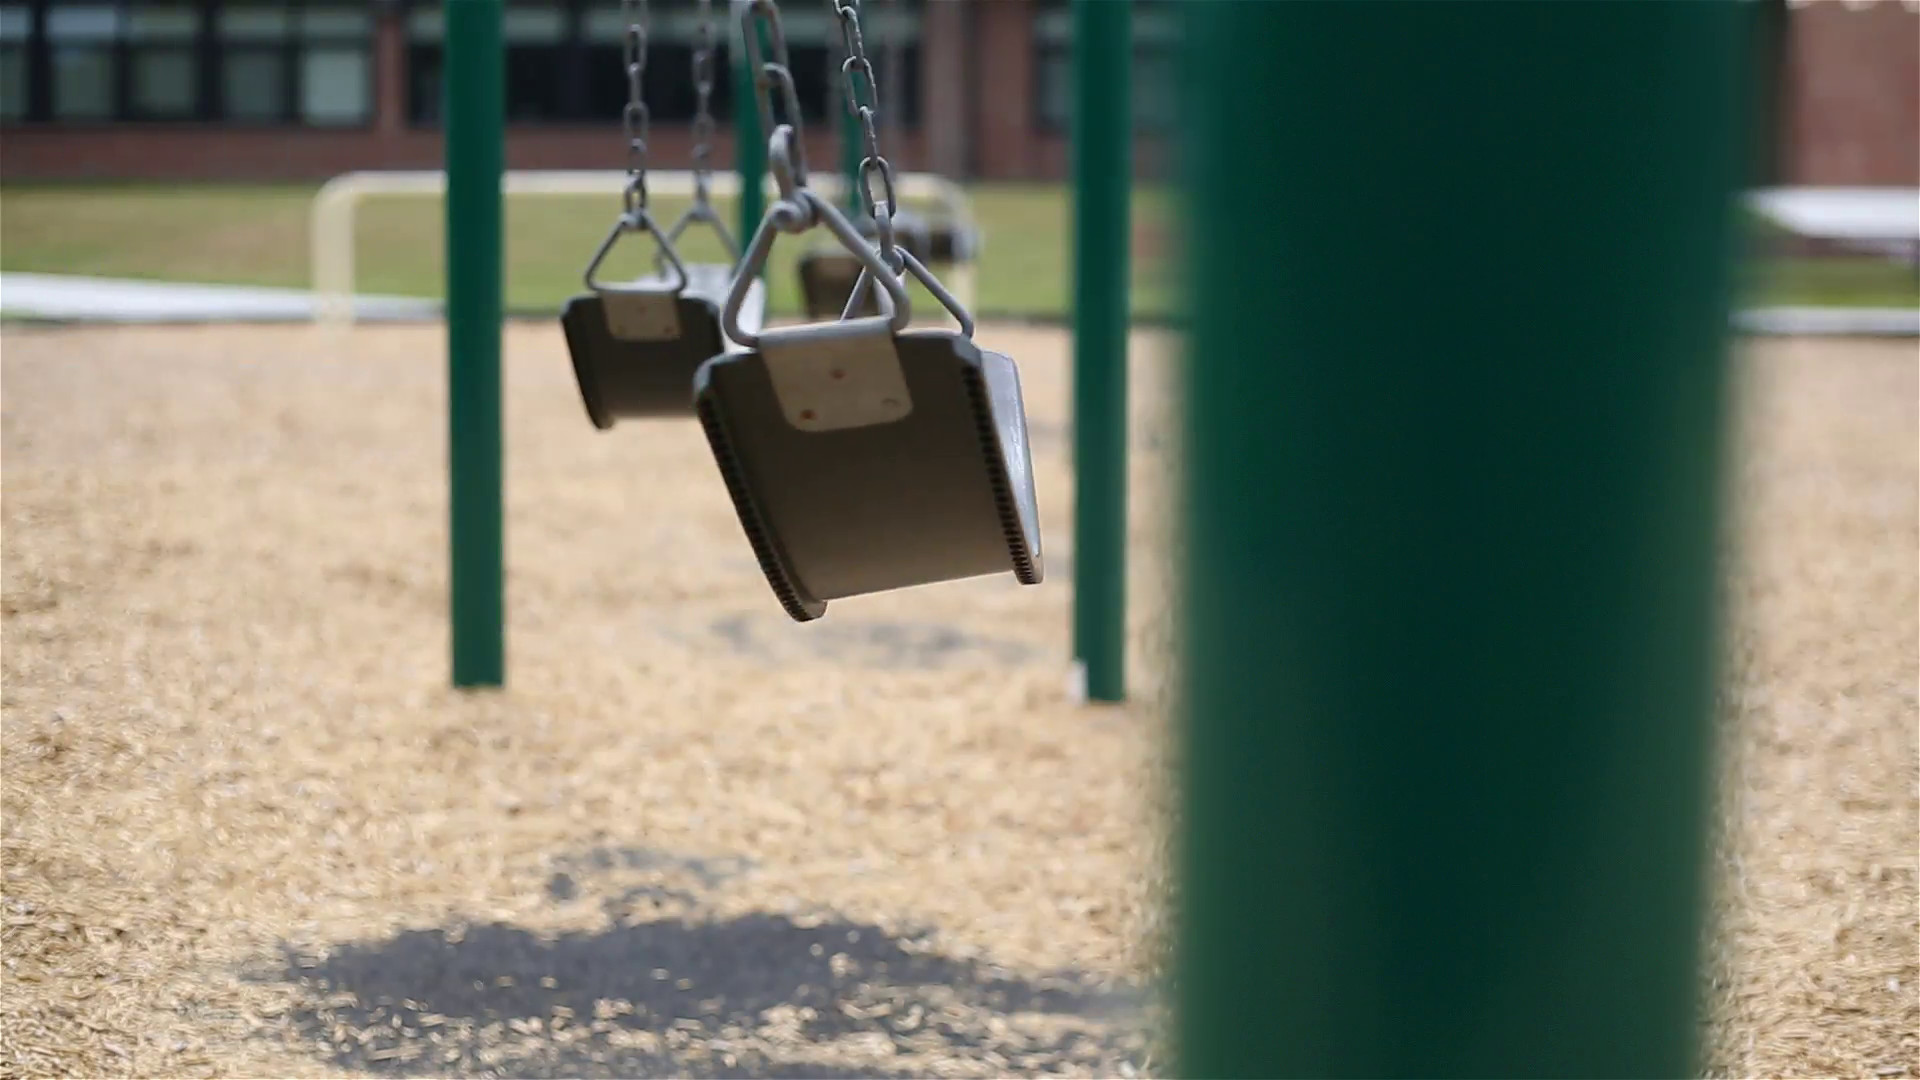 1920x1080 Swing Fast School Background Selective Focus. a long shot with shallow  depth of field on a row of swings with a school in the background. closest  swing ...